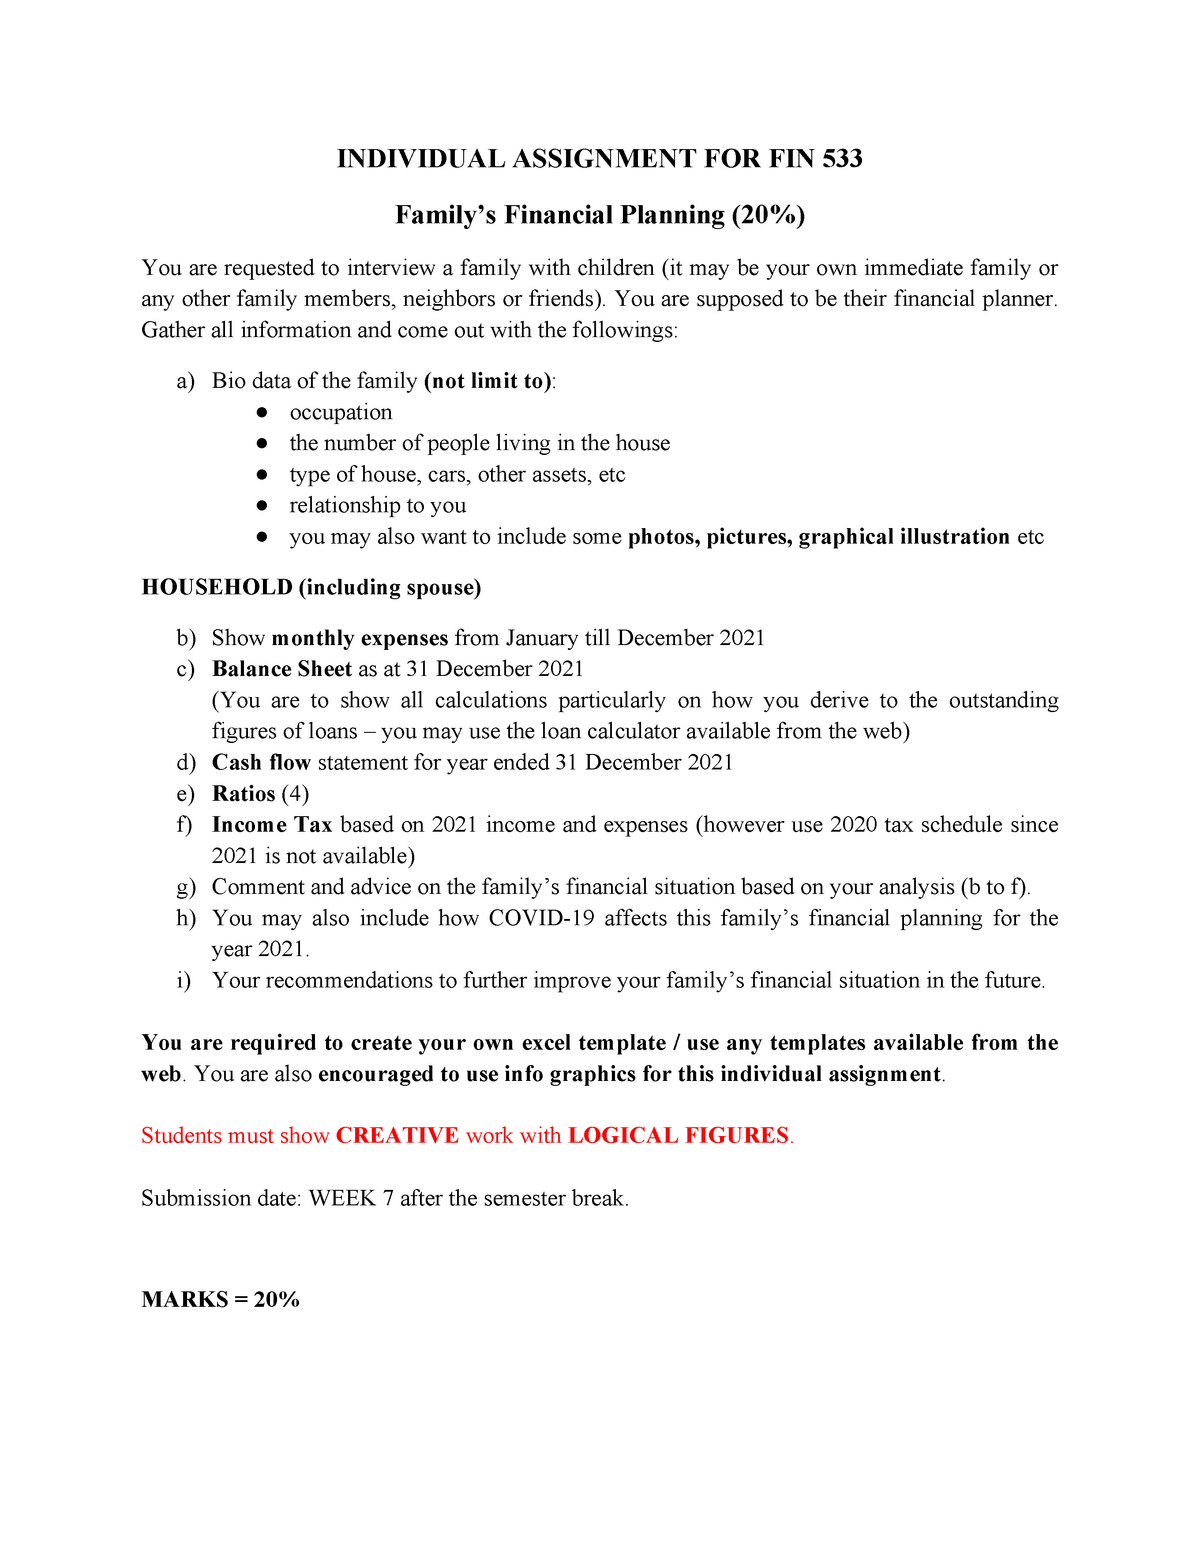 personal financial planning individual assignment